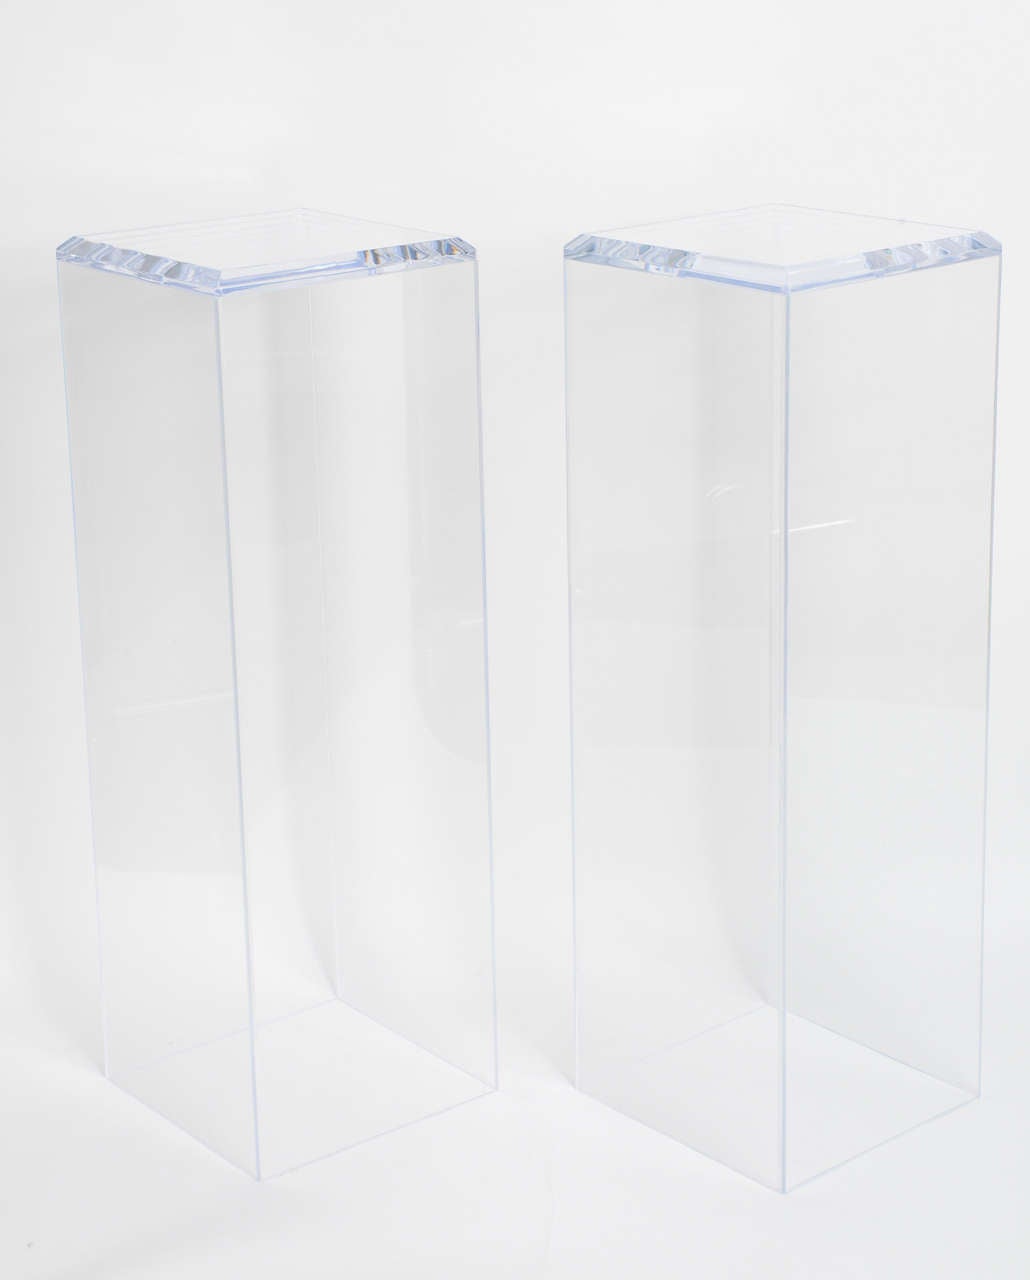 This stylish custom set of Lucite pedestals will make the perfect perch for your favorite sculpture or perhaps a vase of flowers.

Note: The top edge bevel measures .75